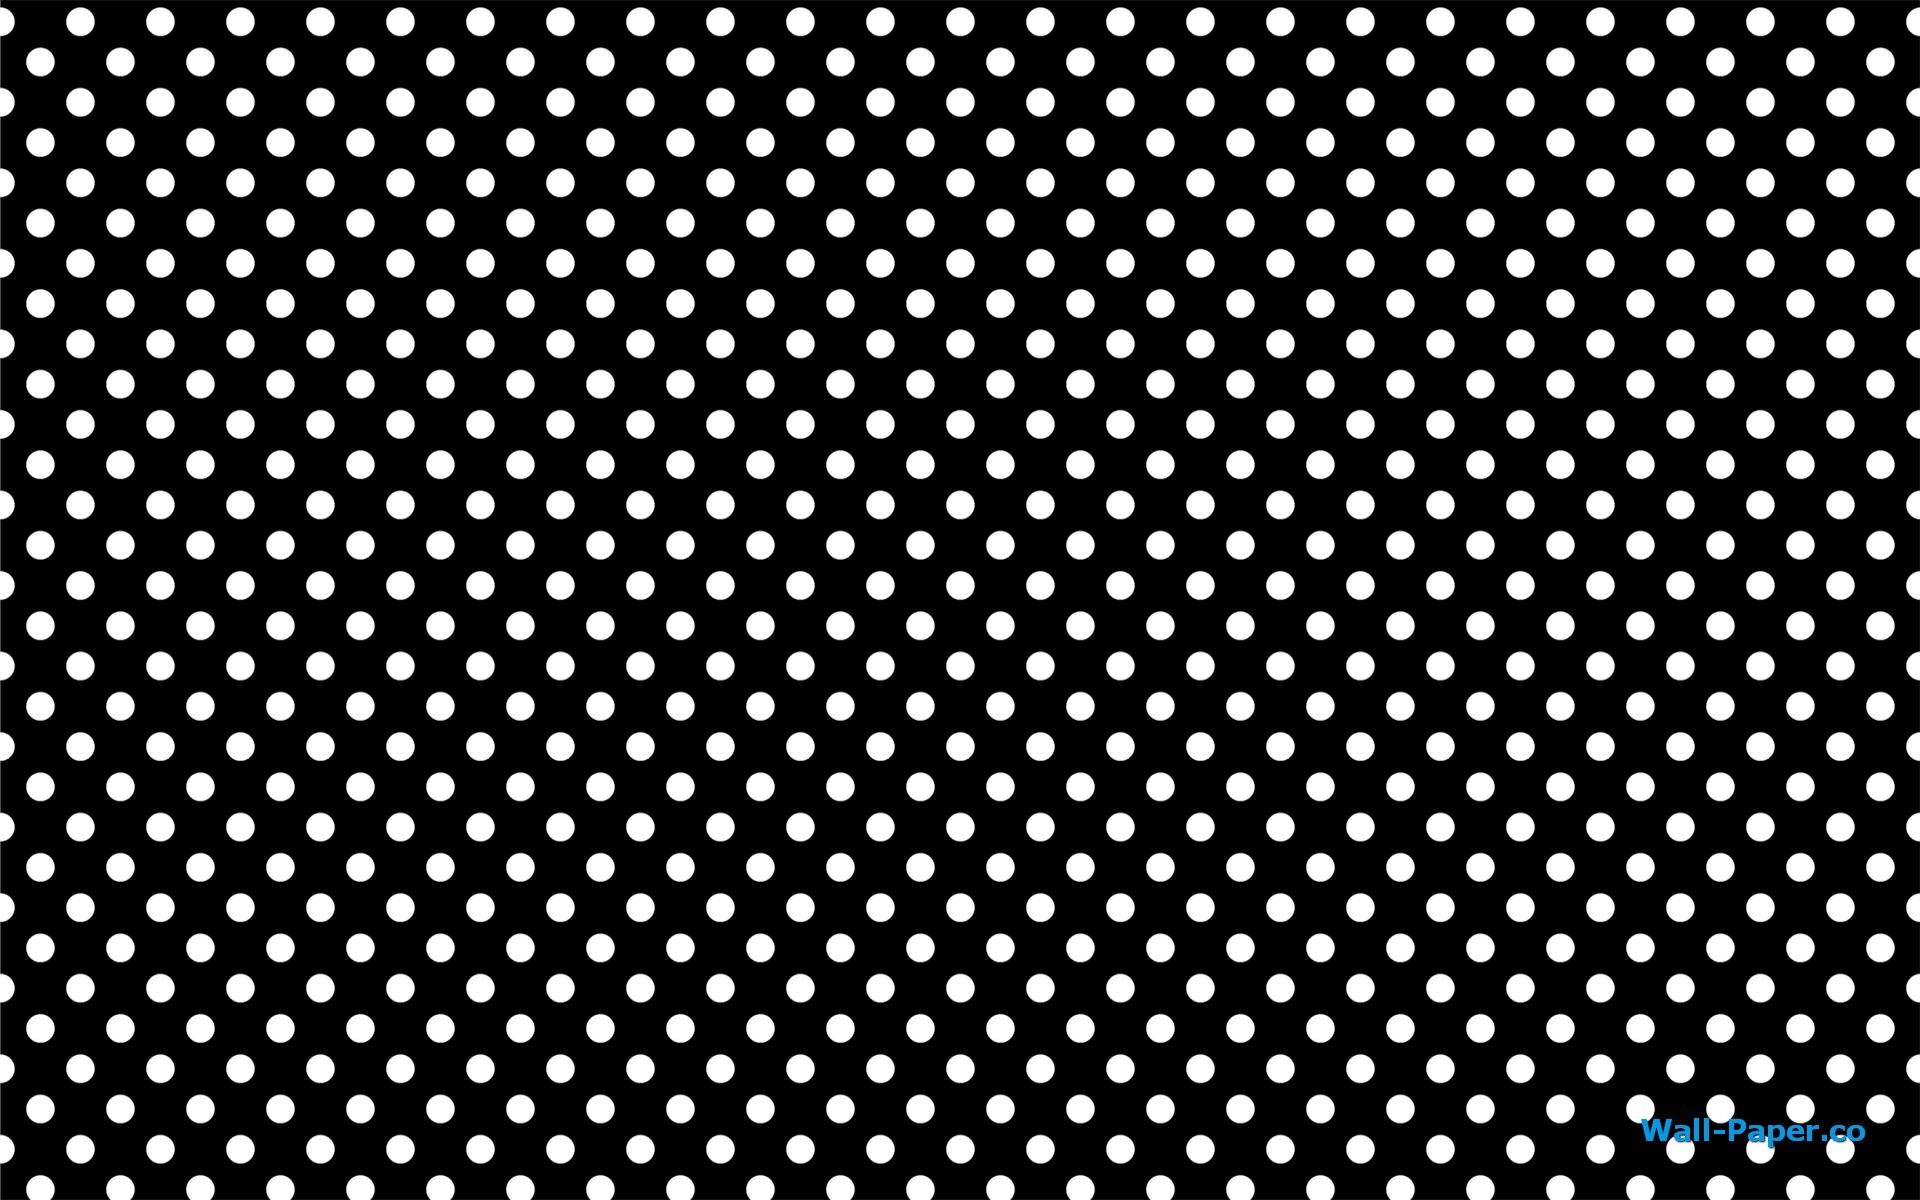 1920x1200 Polka Dot Wallpaper. Best and fine collection of wallpapers HD in .